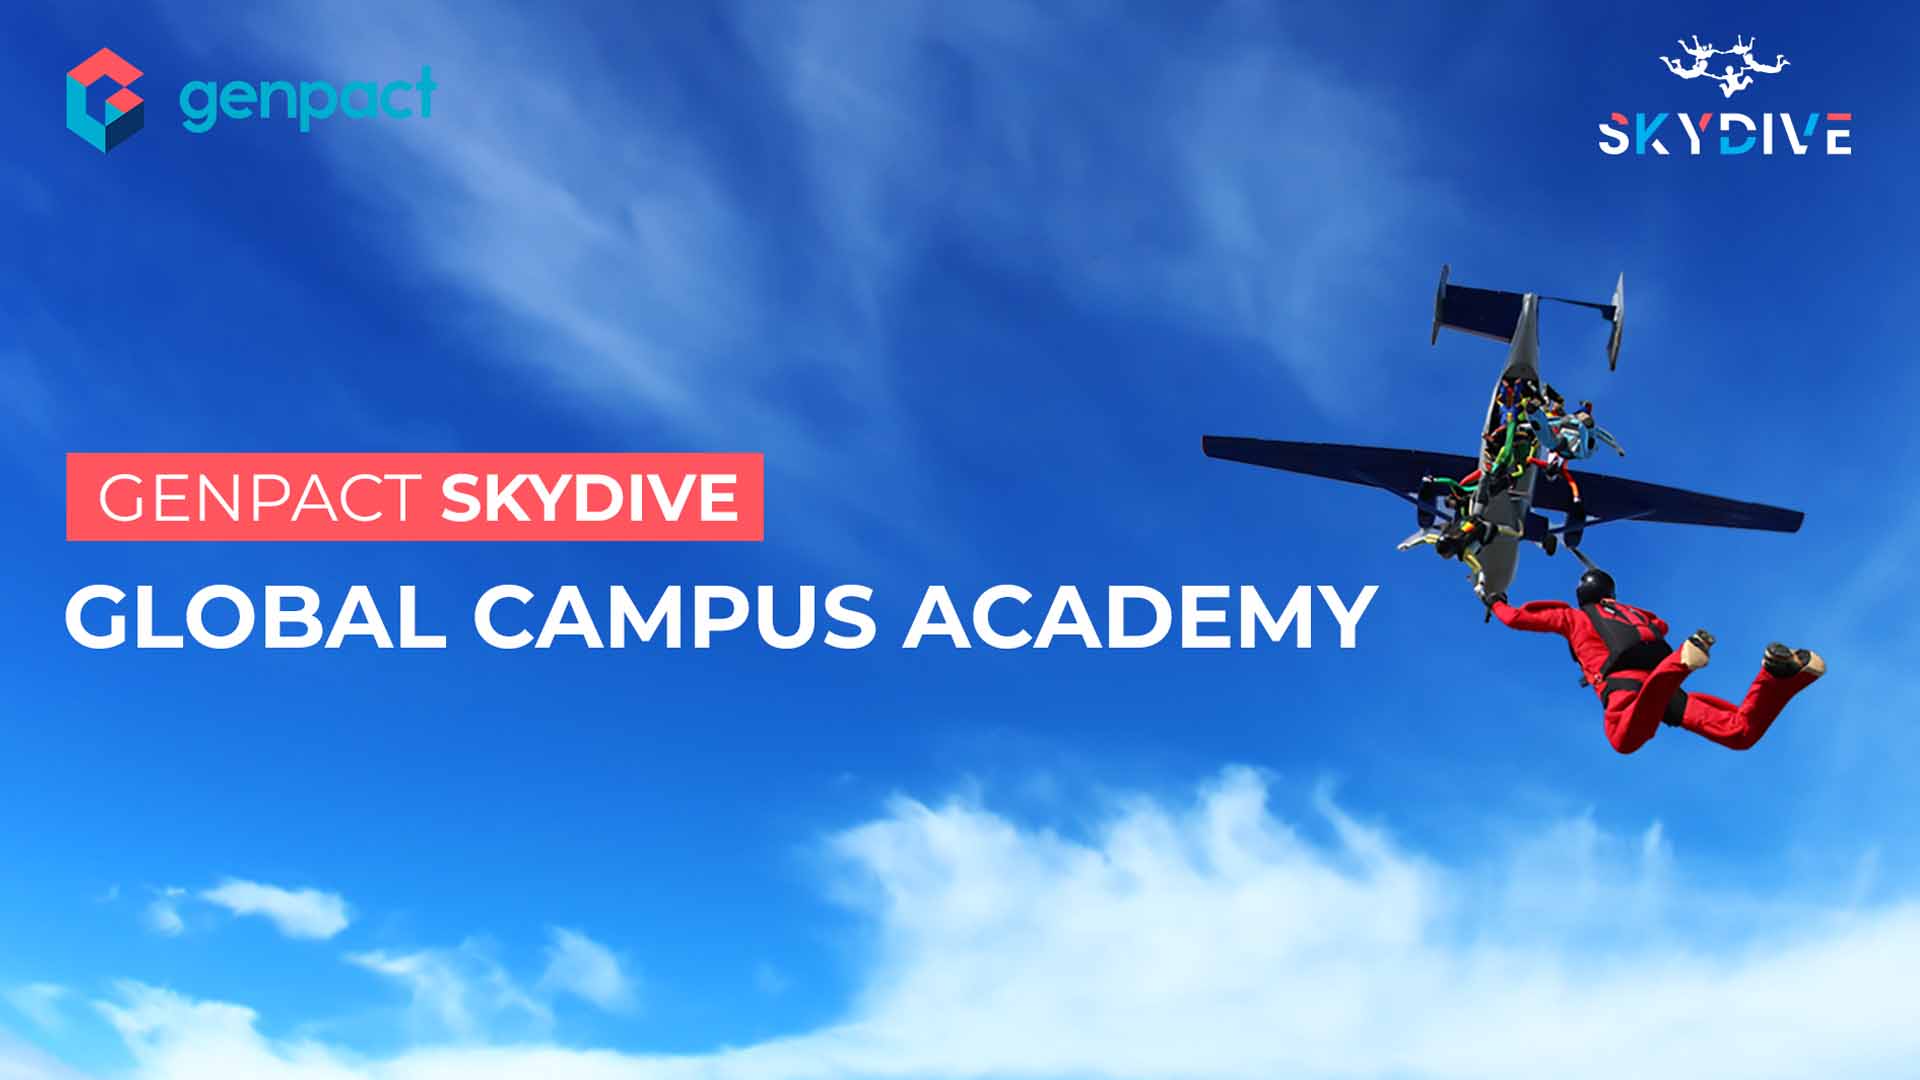 Genpact Launches SkyDive Global Campus Academy – a Distinct Campus-to-Corporate Program for Campus Graduates